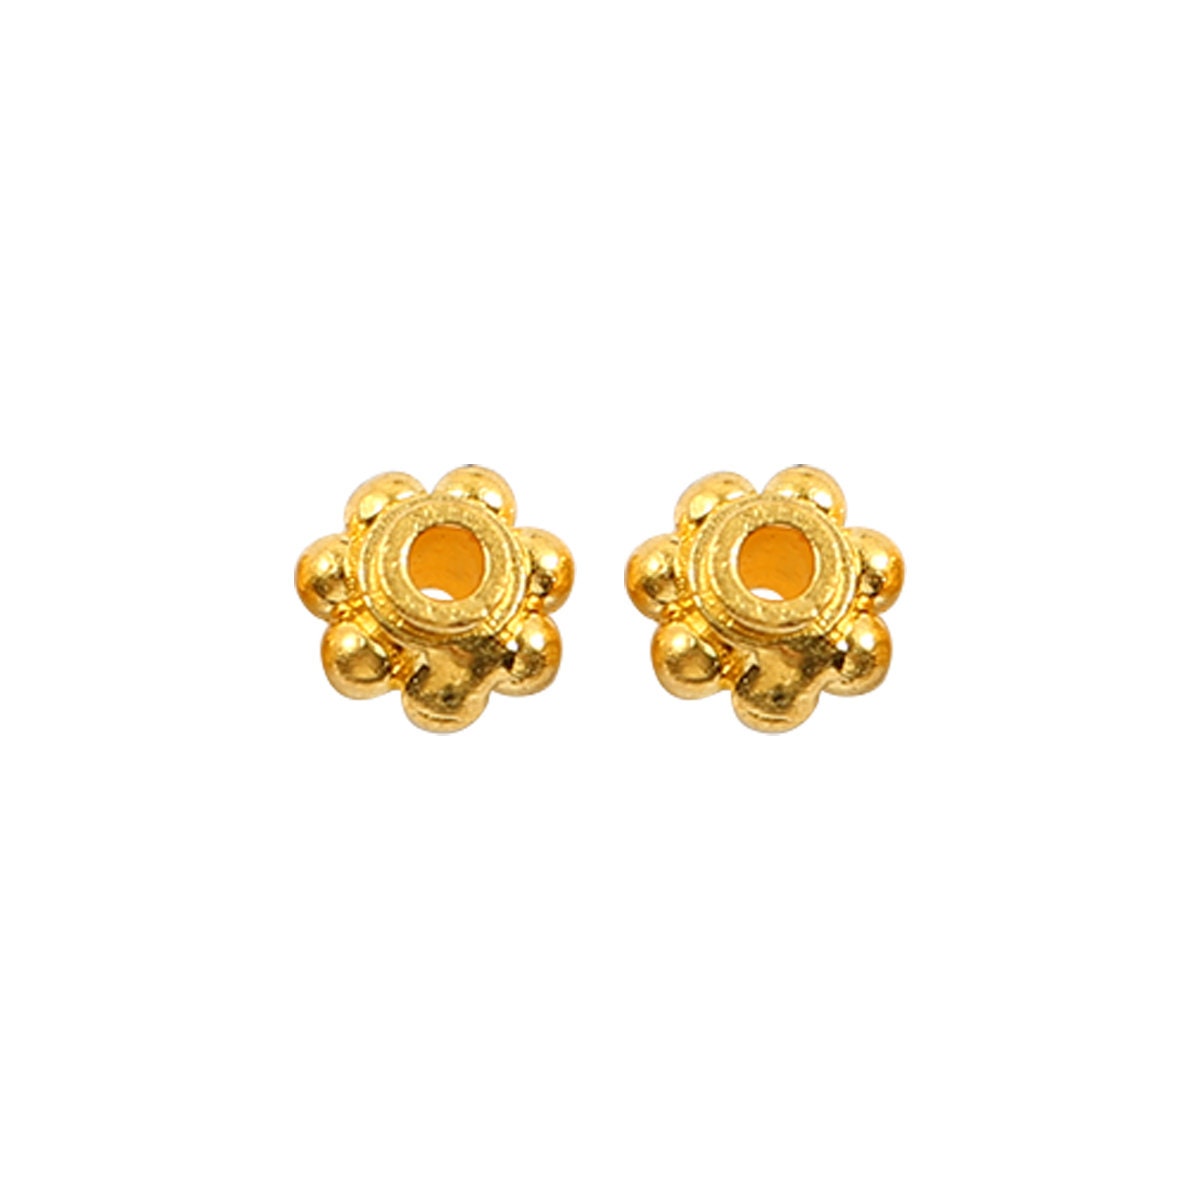 24K Gold Ancient Gold Chiseled Flower Flat Spacer Beads Beads - Etsy